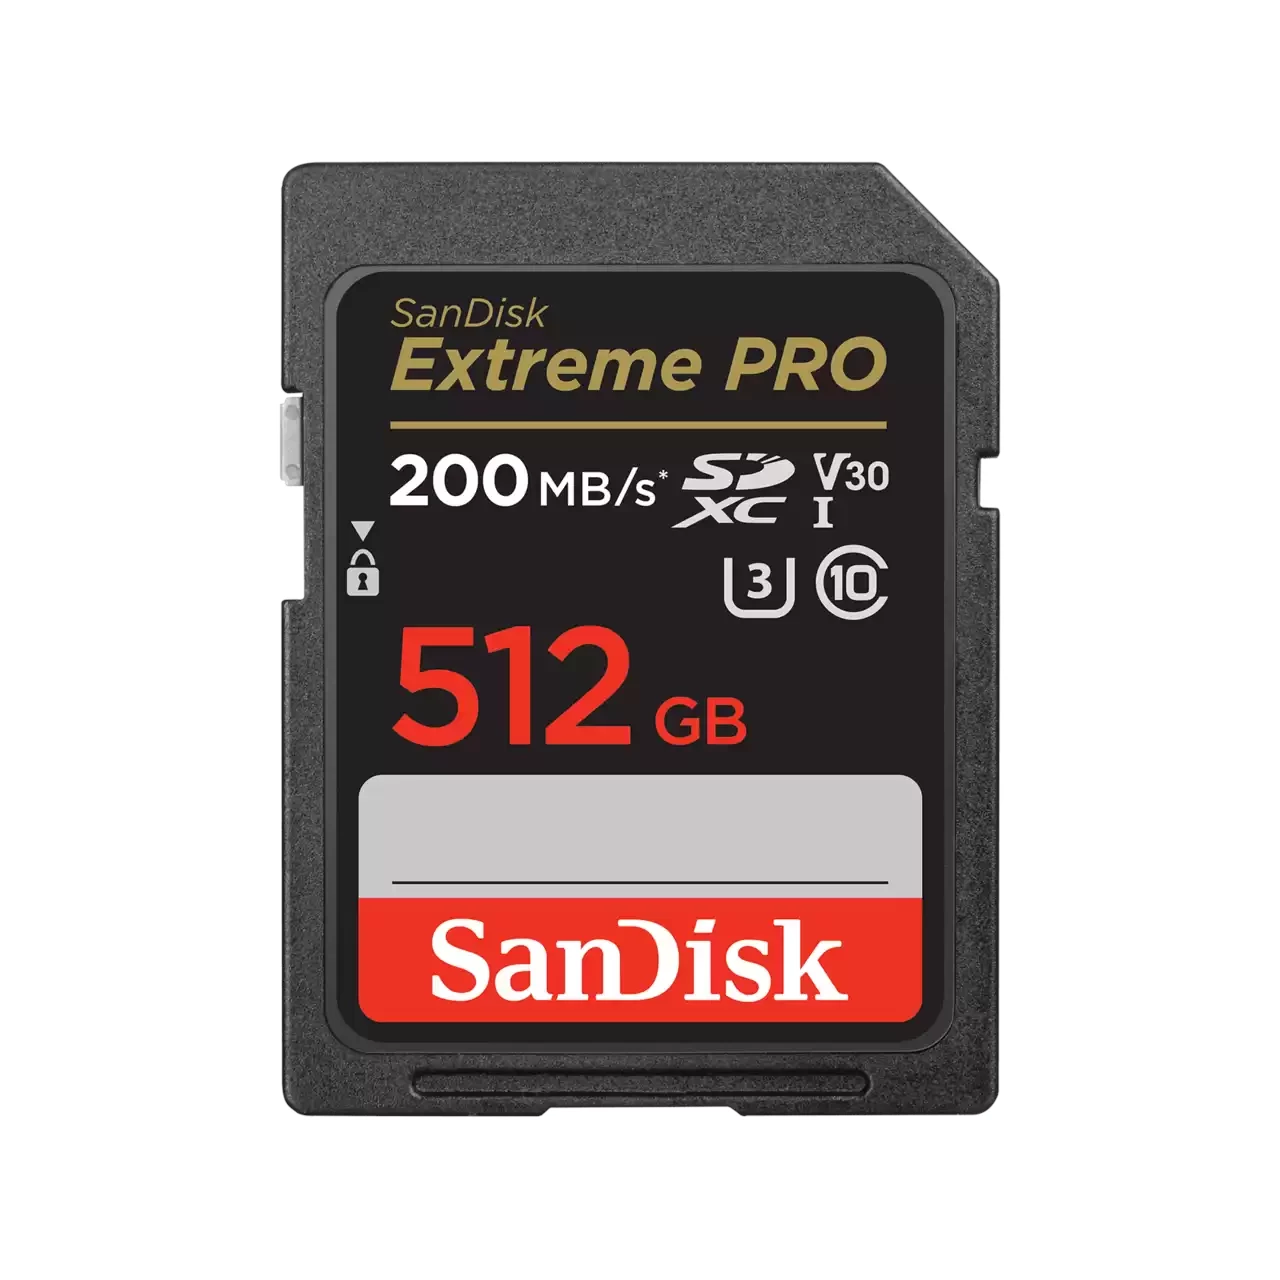 Sandisk Extreme PRO 512Gb SDXC UHS-I 記憶卡 #sDsDXXD-512g-gN4iN